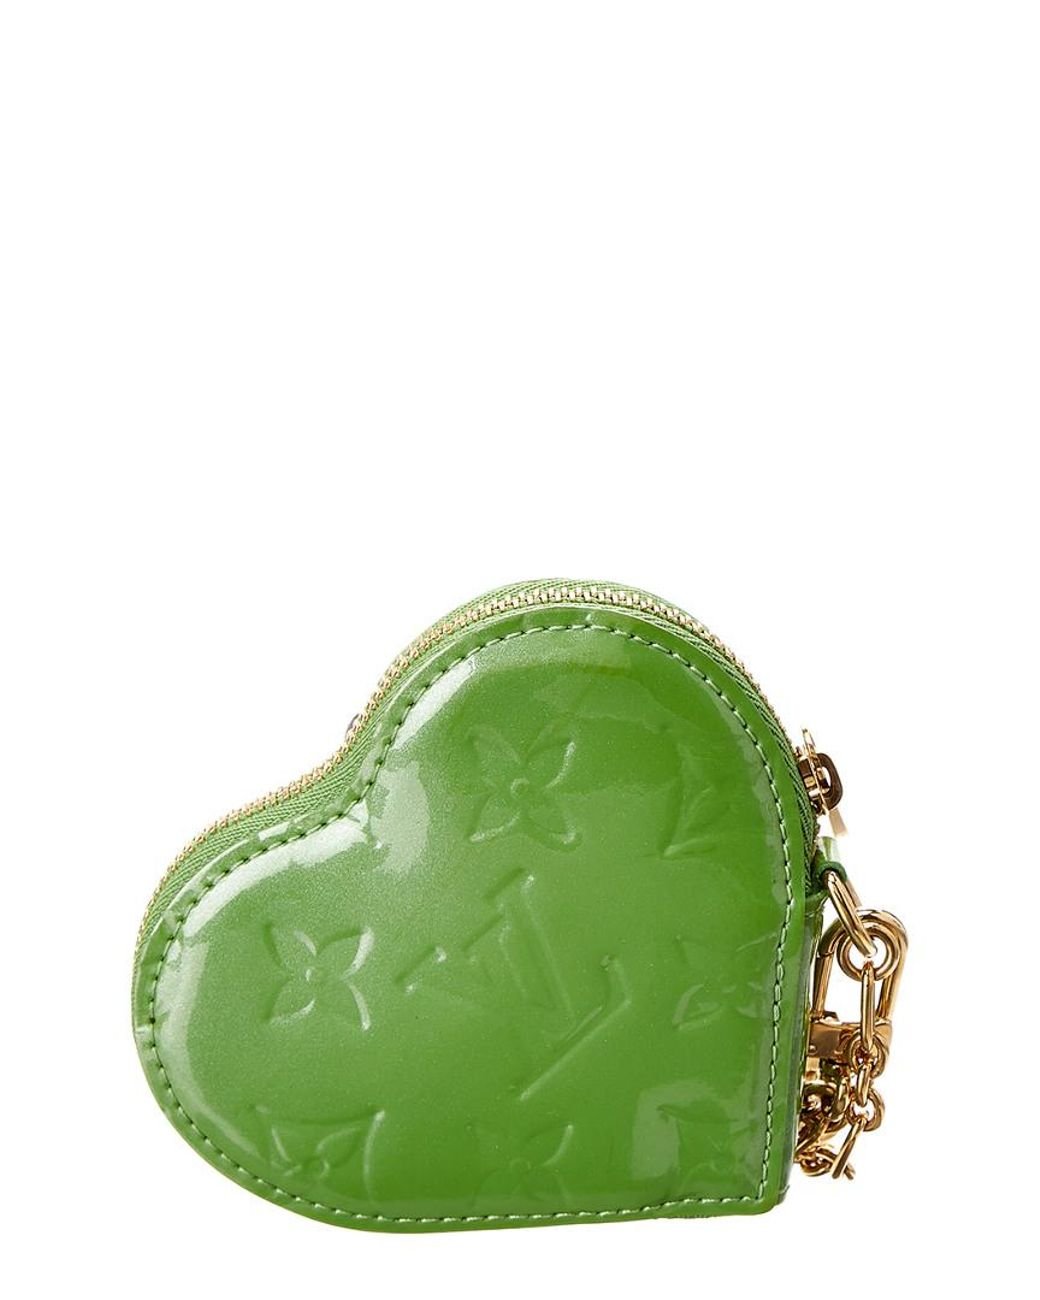 Louis Vuitton Vernis Leather Limited Edition Stephen Sprouse Heart